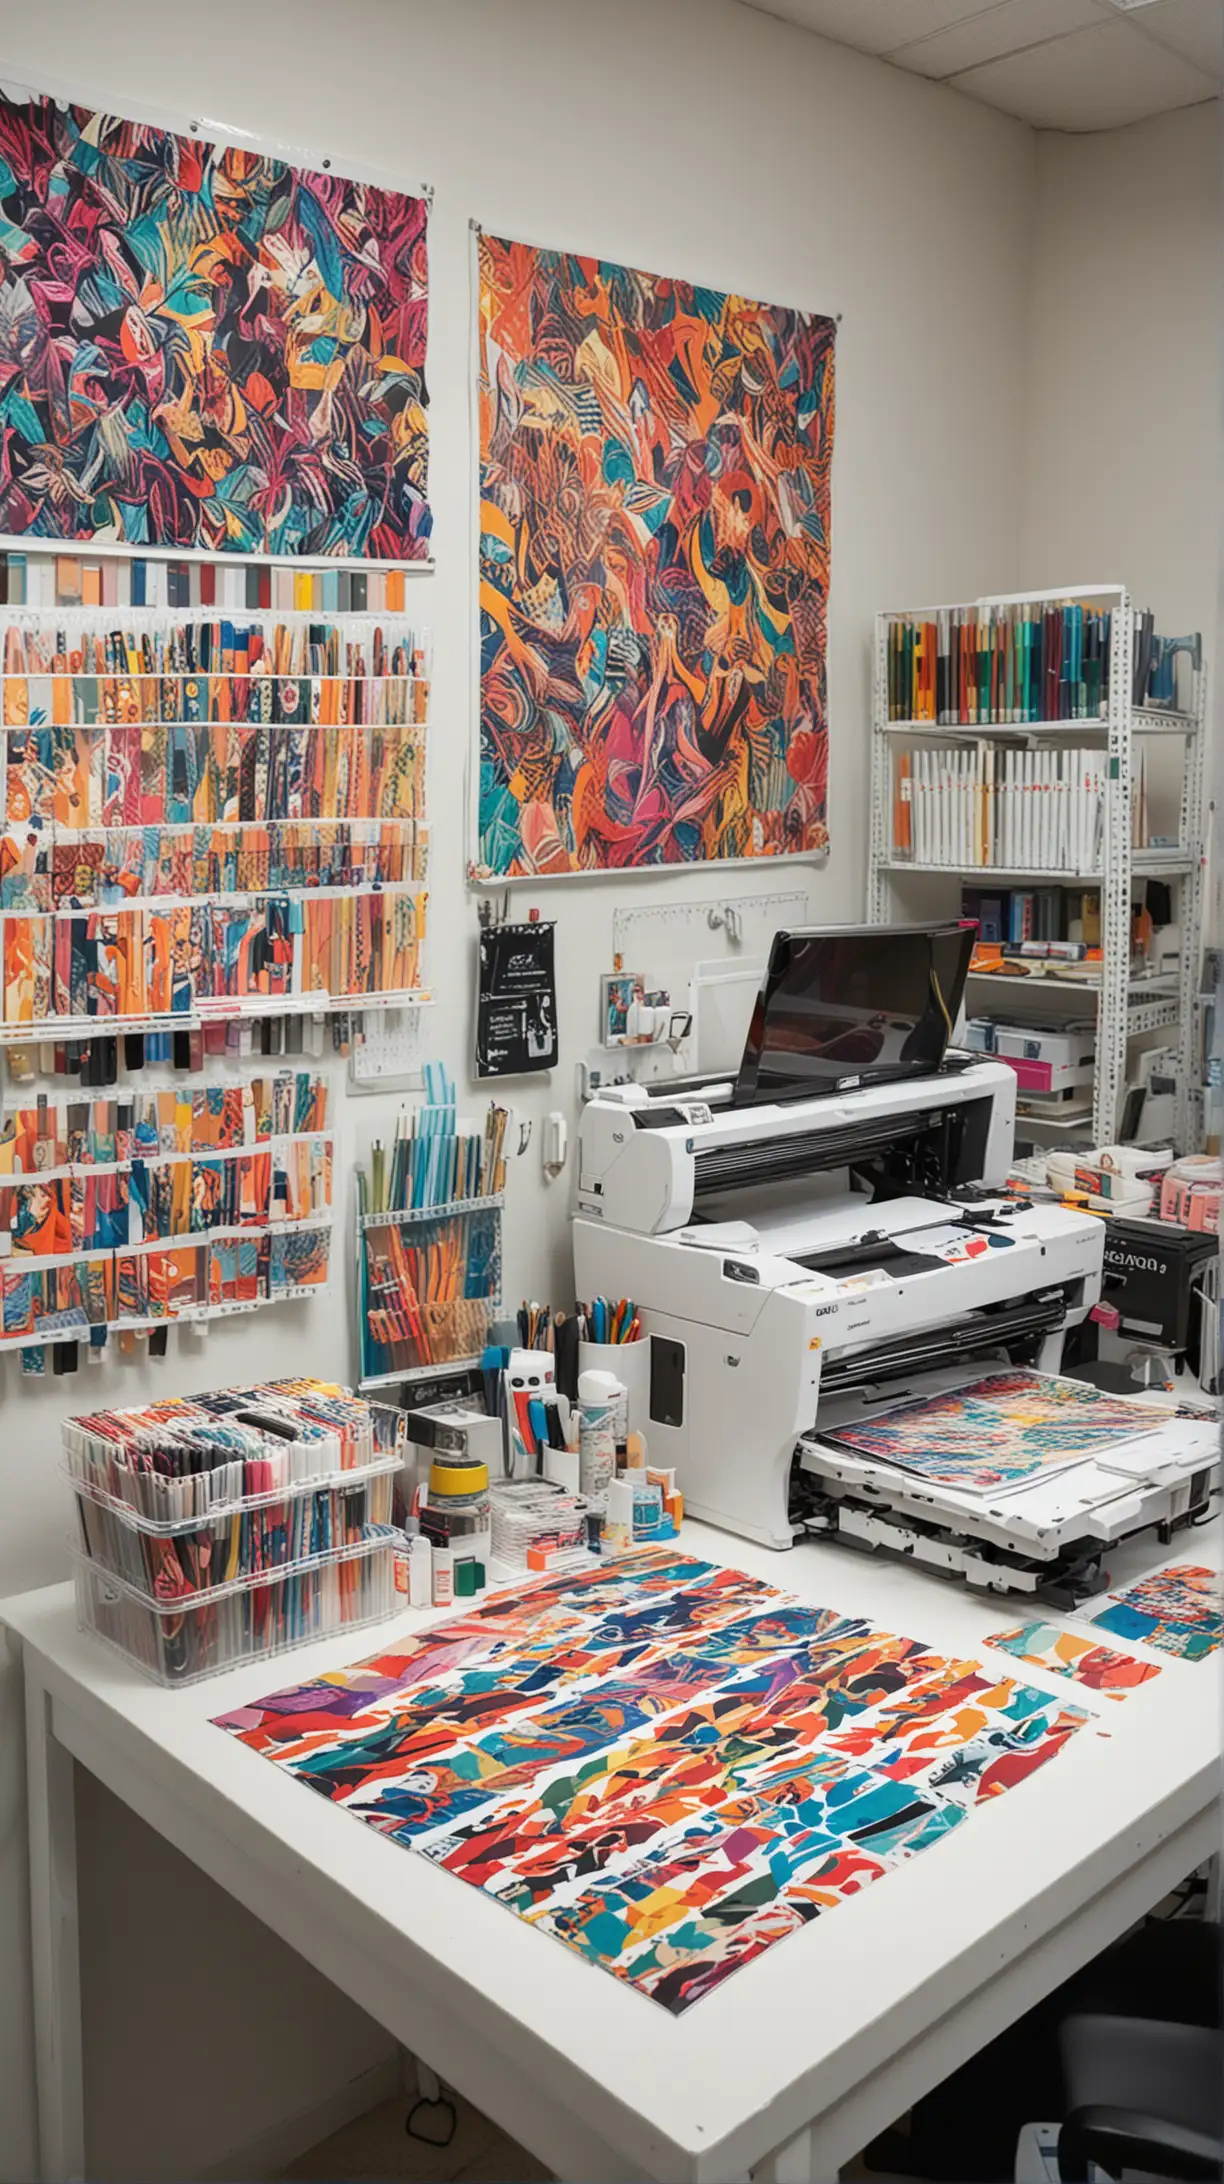 A well-organized workspace for sublimation, featuring colorful abstract patterns, sublimation tools, and various acrylic items. The workspace includes a sublimation printer, heat press machine, pens, markers, and acrylic bookmarks, all showcasing vibrant sublimation designs. The atmosphere is bright and creative, highlighting the tools and materials used in the sublimation process. Ensure no humans, animals, or images of living creatures are present.